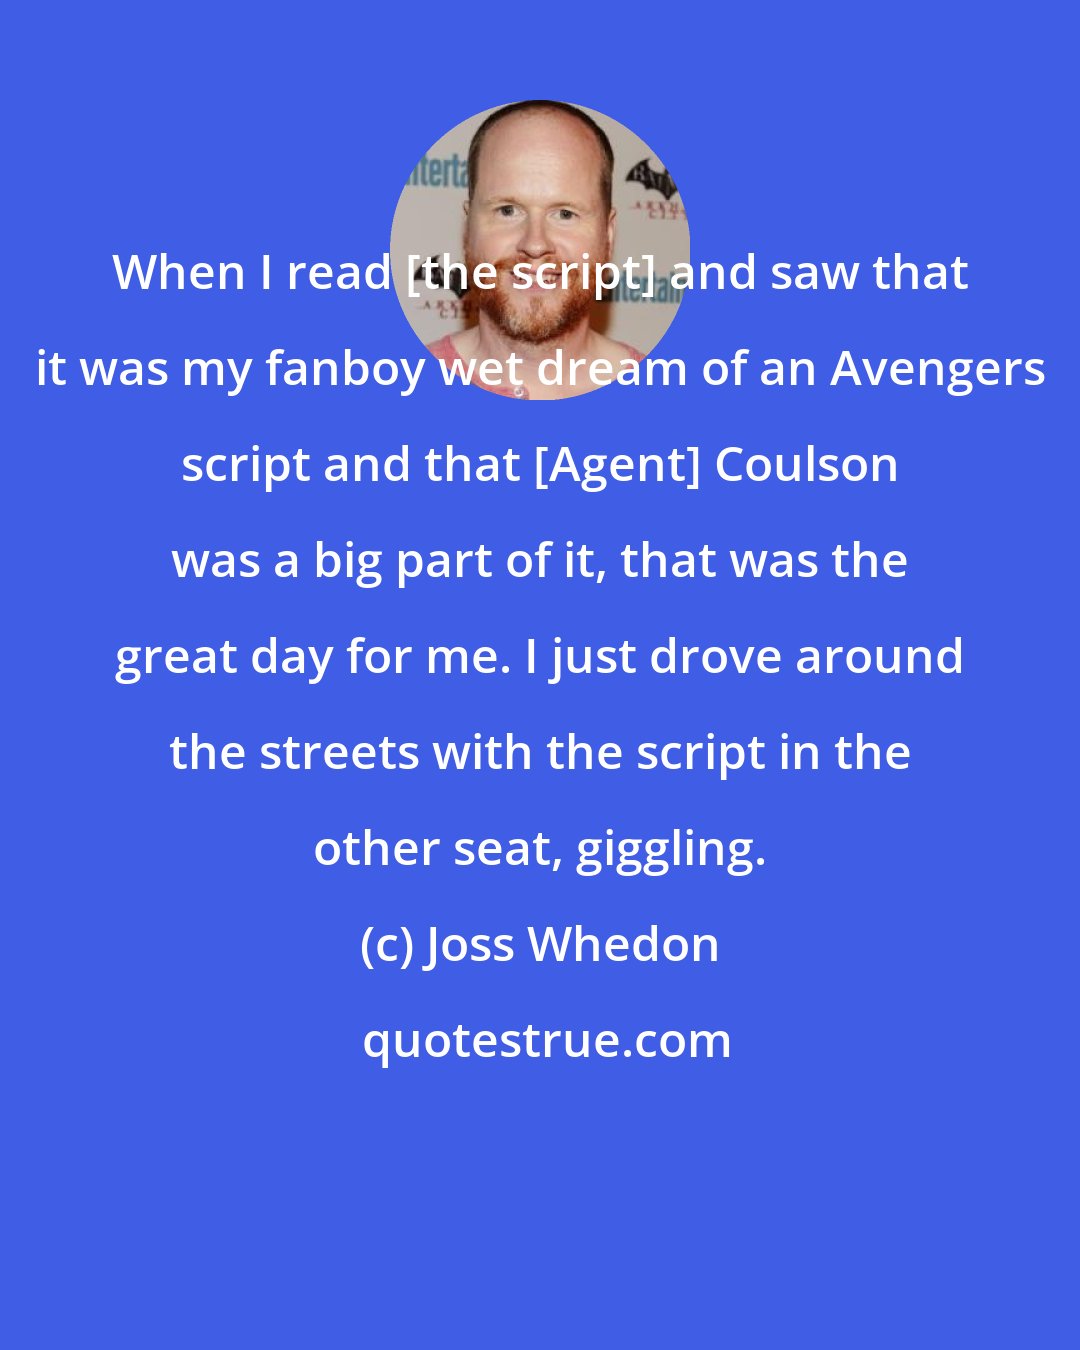 Joss Whedon: When I read [the script] and saw that it was my fanboy wet dream of an Avengers script and that [Agent] Coulson was a big part of it, that was the great day for me. I just drove around the streets with the script in the other seat, giggling.